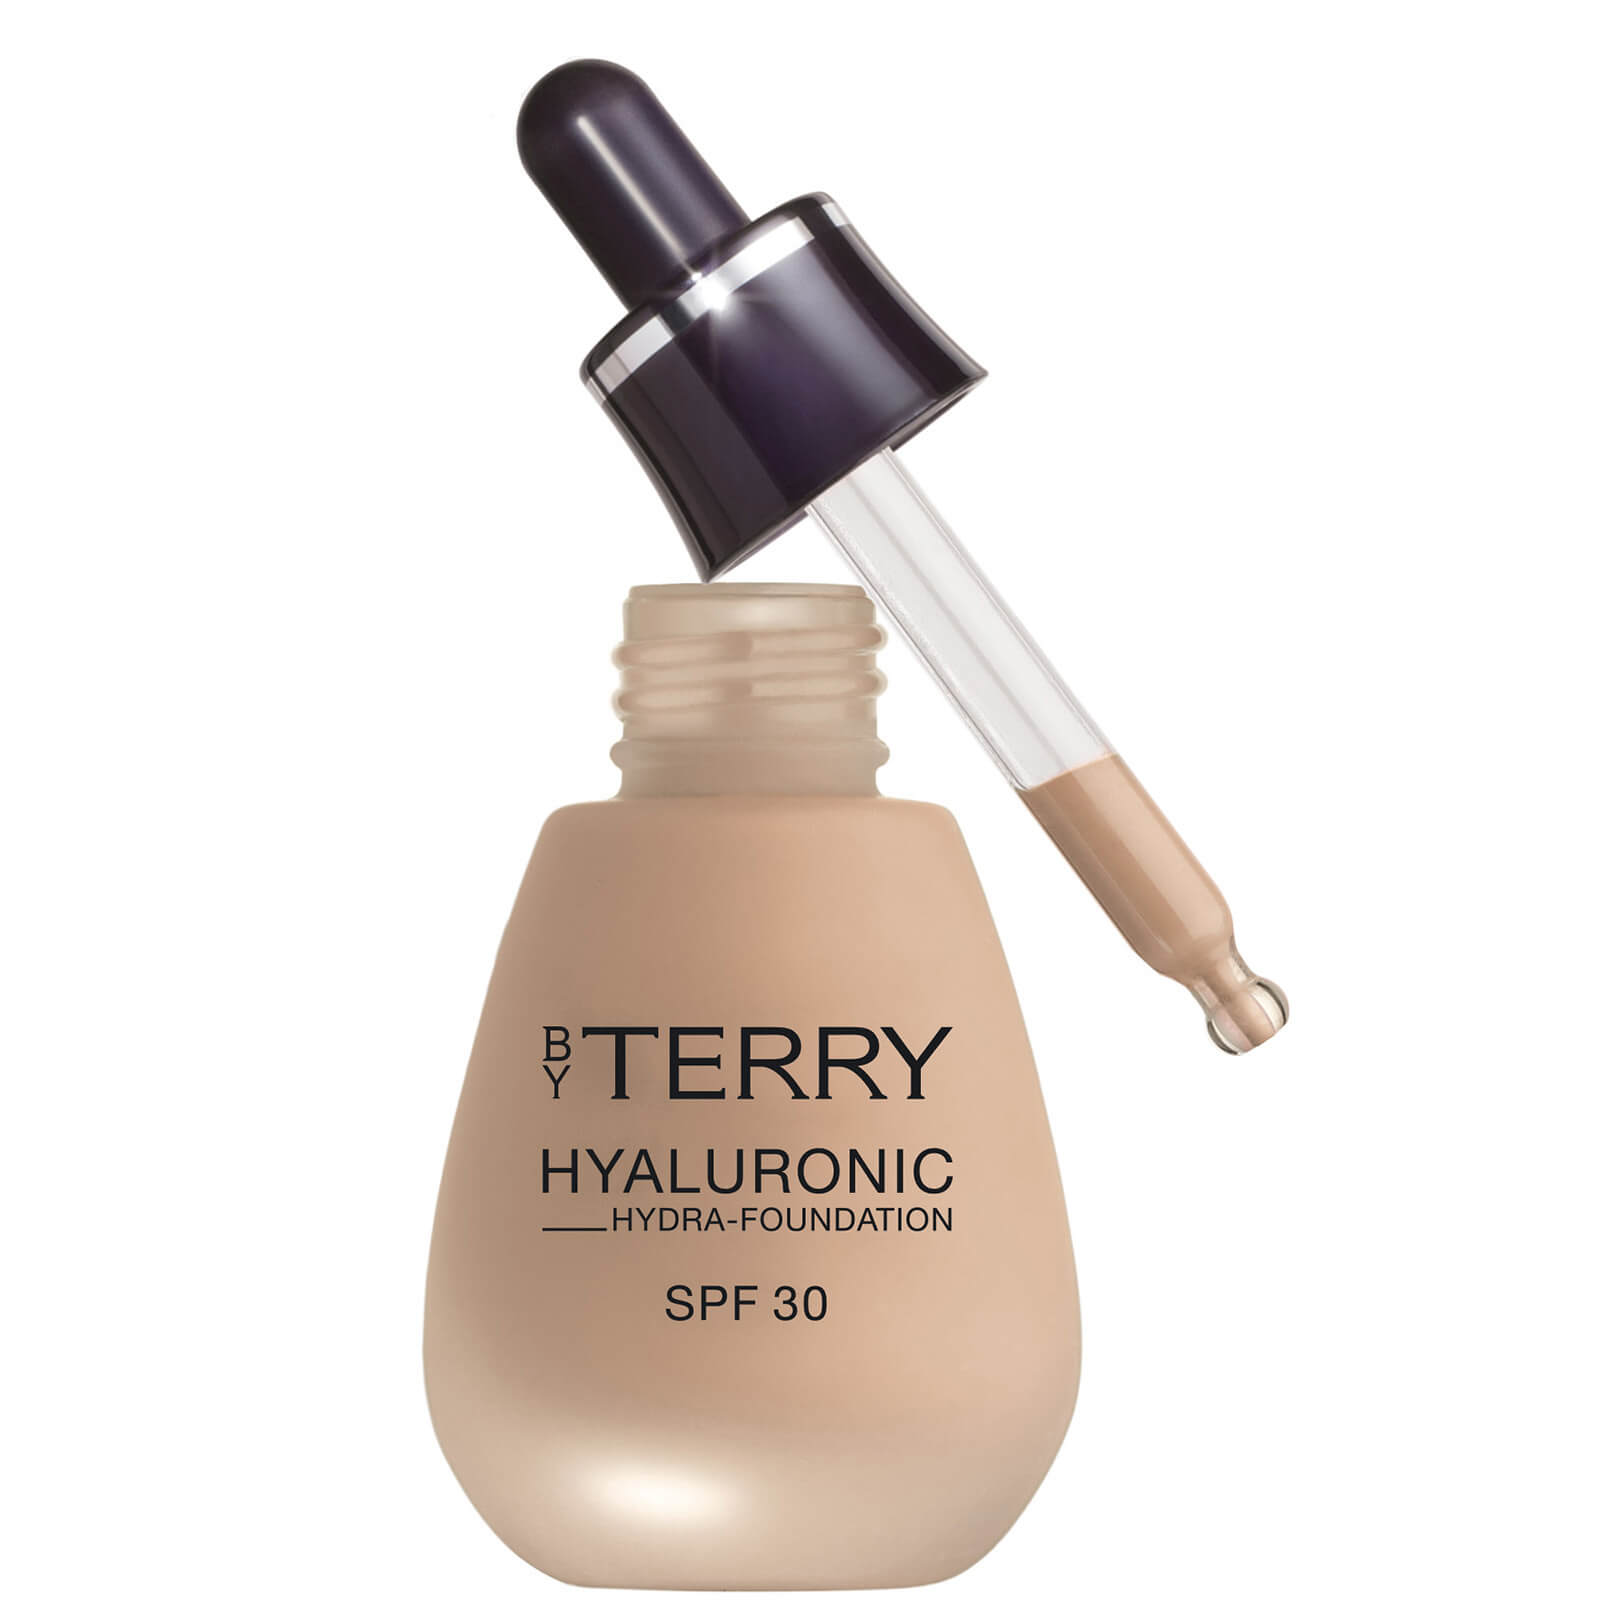 terry hyaluronic hydra foundation